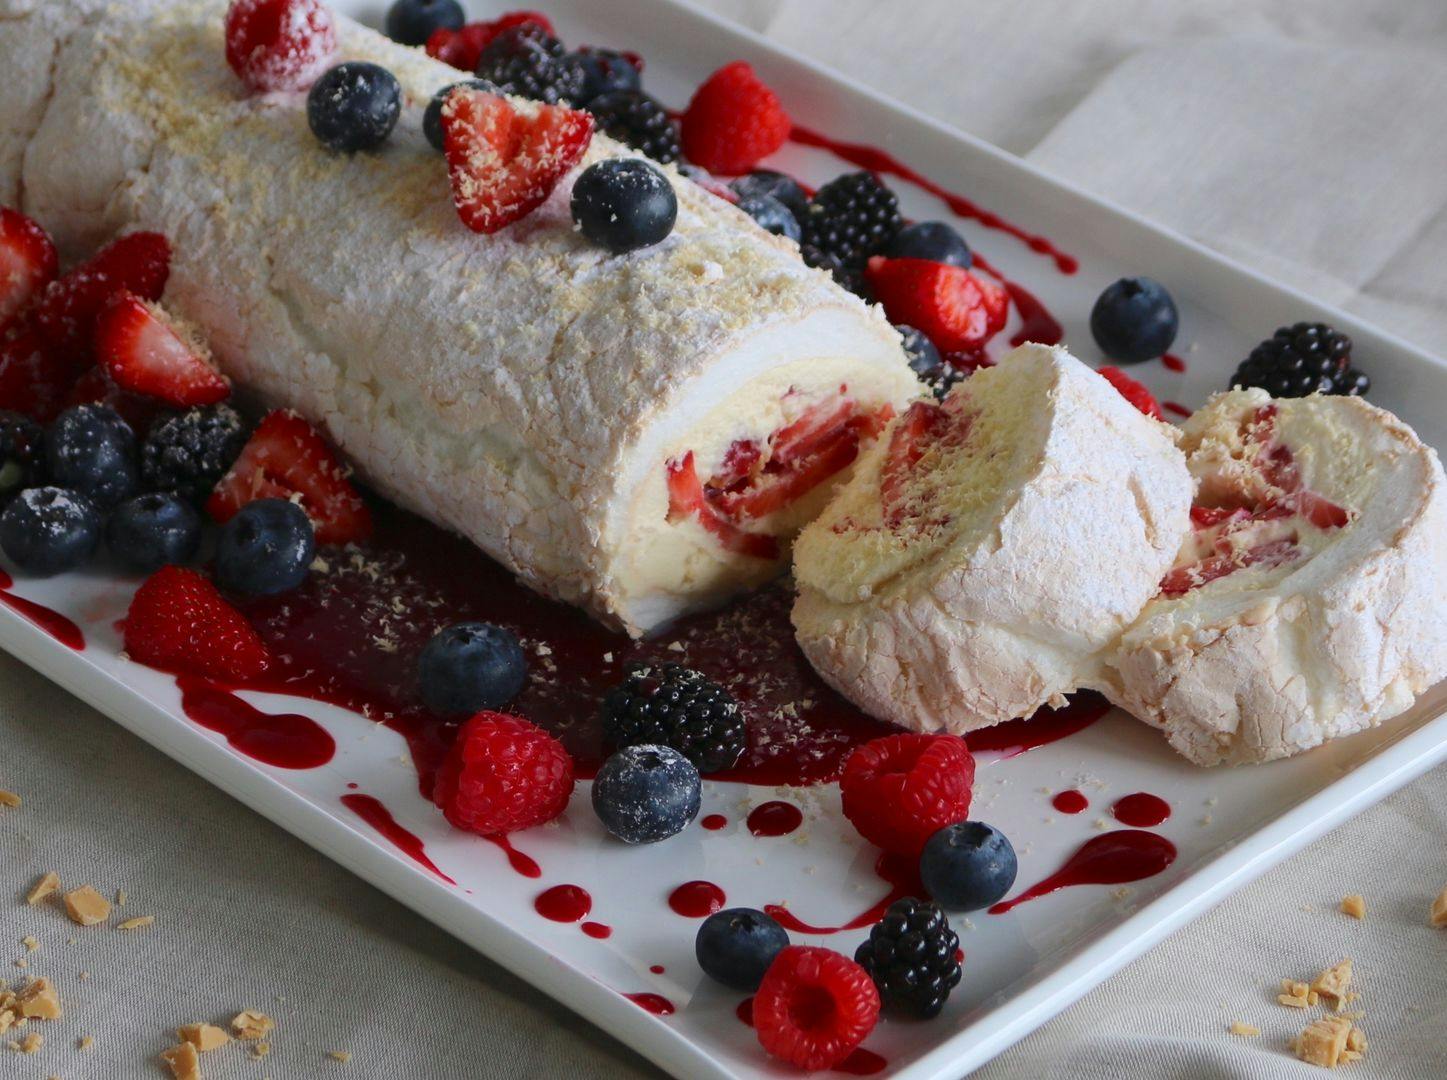 Meringue roulade with fresh berries and white chocolate